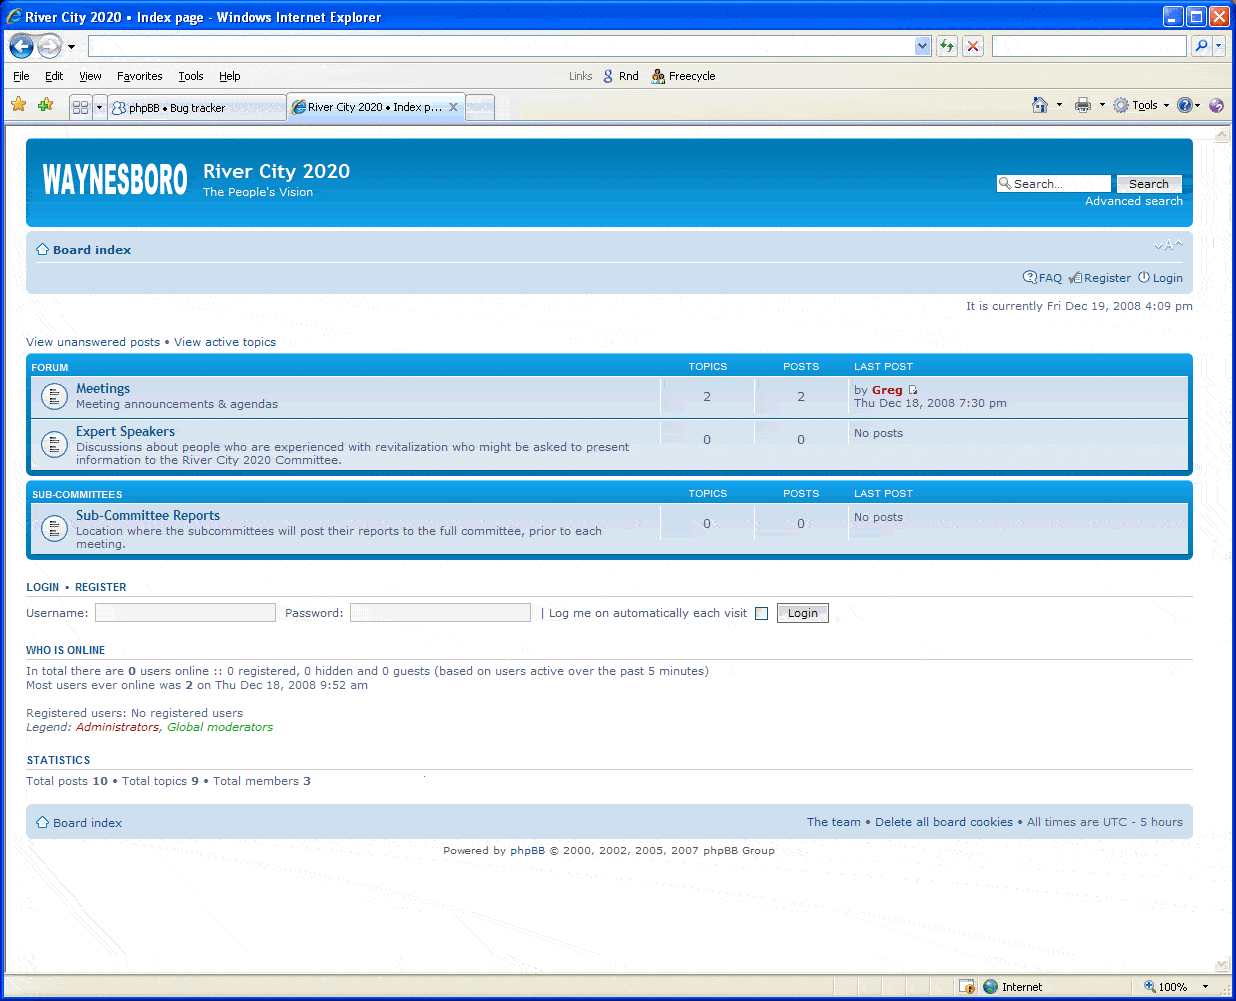 download phpbb php 8.1